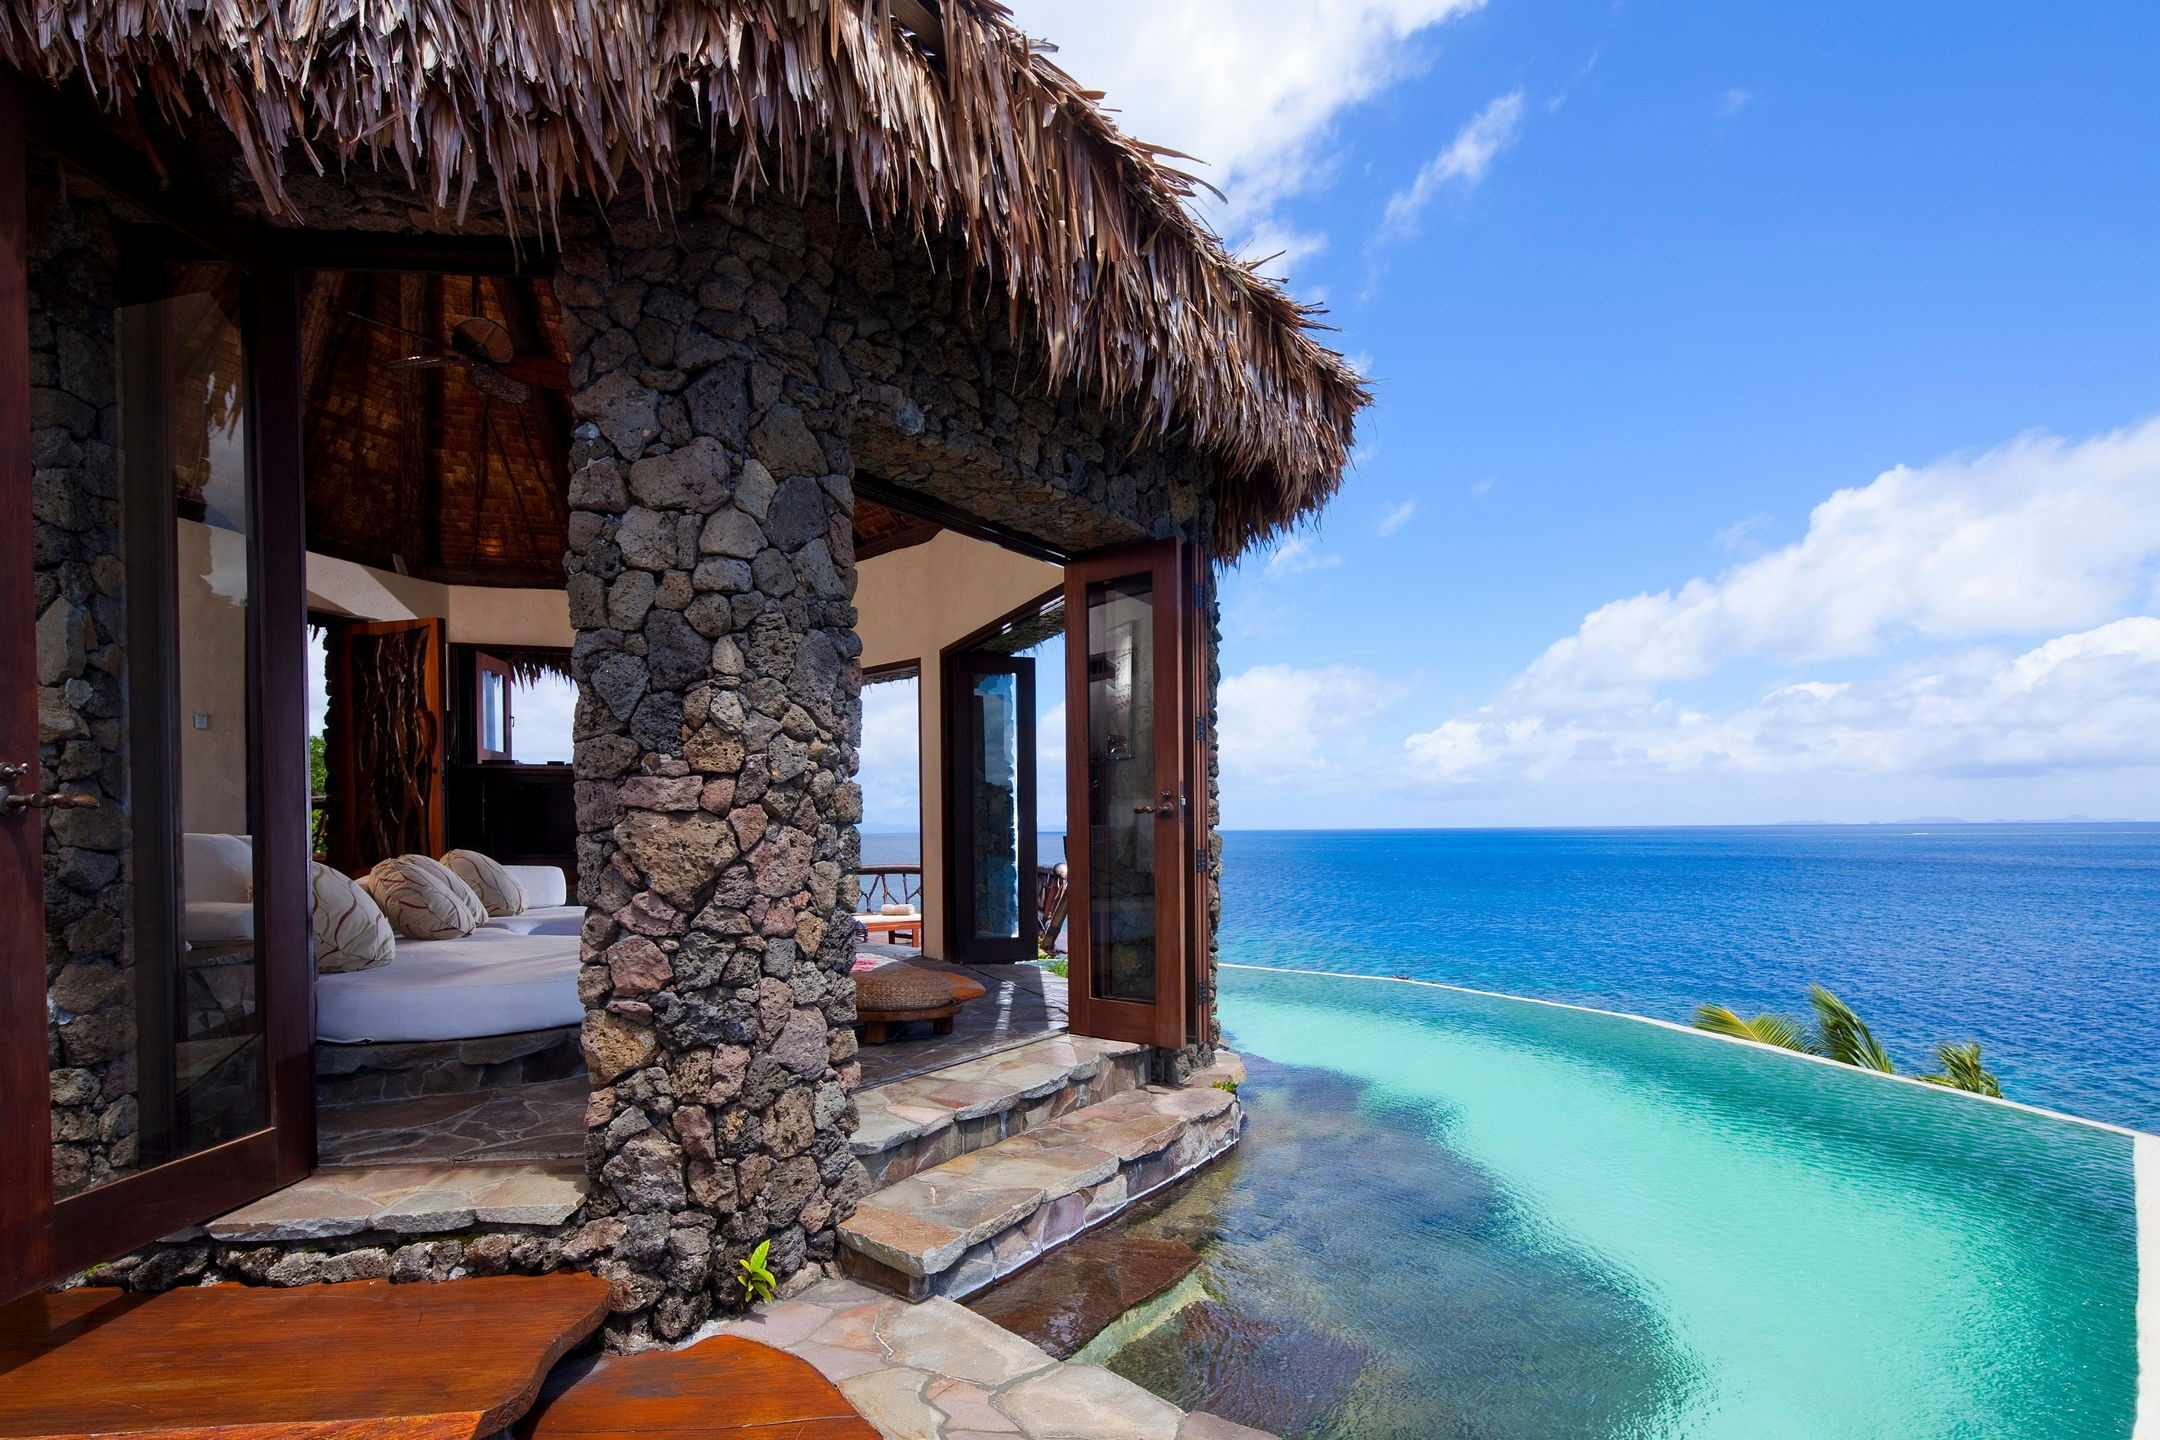 Secluded seven-star hotel, Private Laucala Island, Pacific ocean paradise, Luxurious escape, 2160x1440 HD Desktop